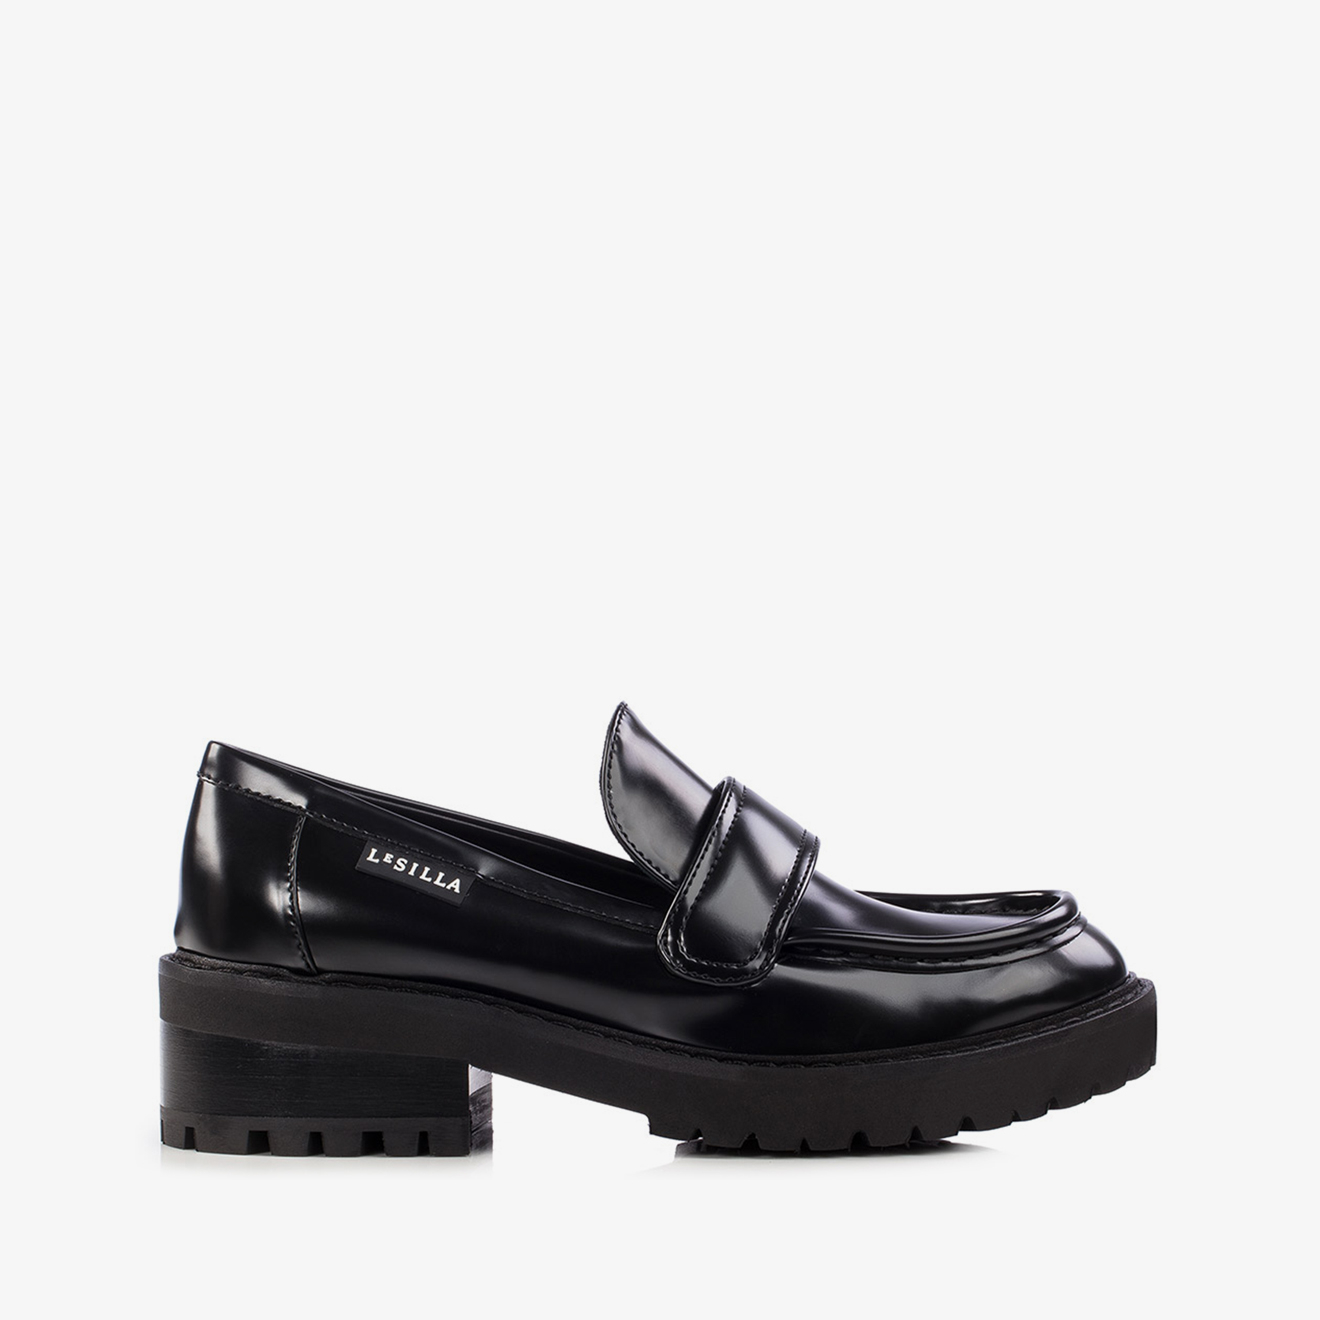 CITYLIFE LOAFER - Le Silla official outlet